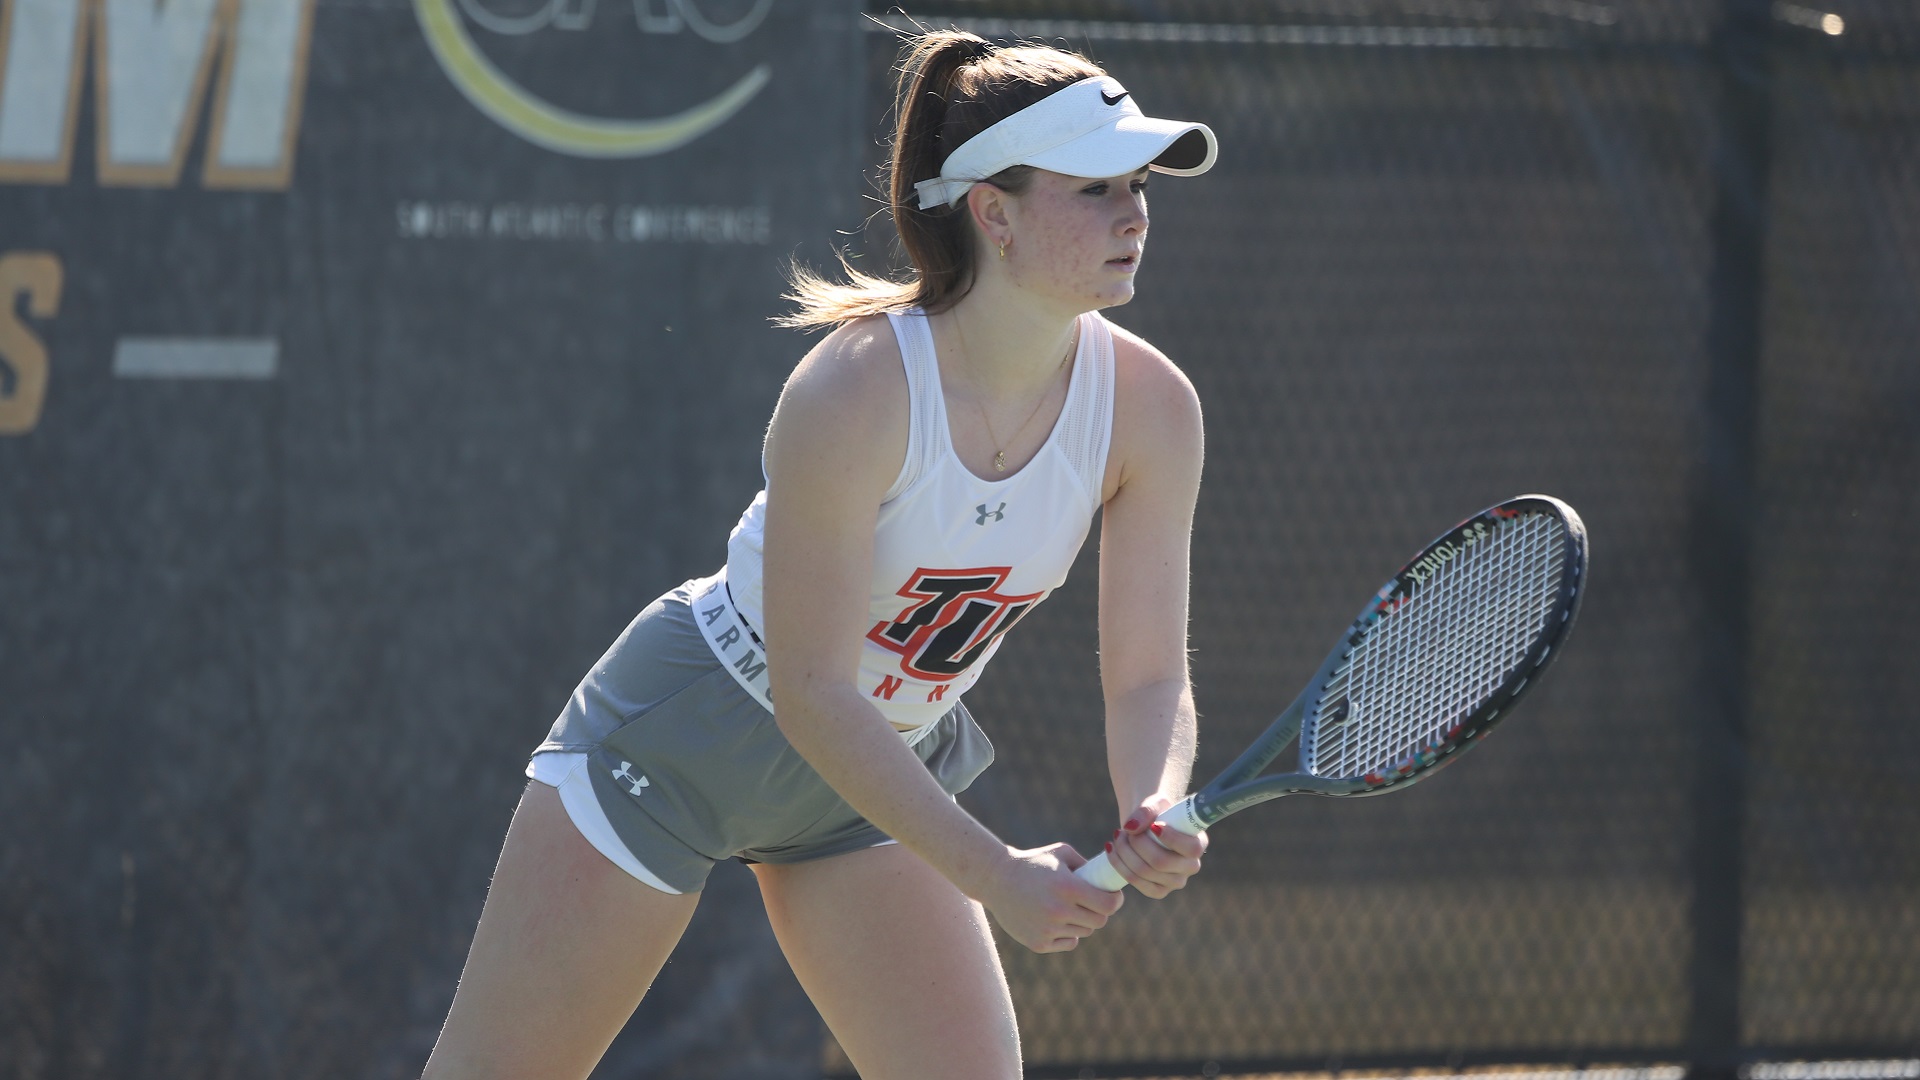 Elodie Baechler rallied from a set down to win her singles match against Mars Hill